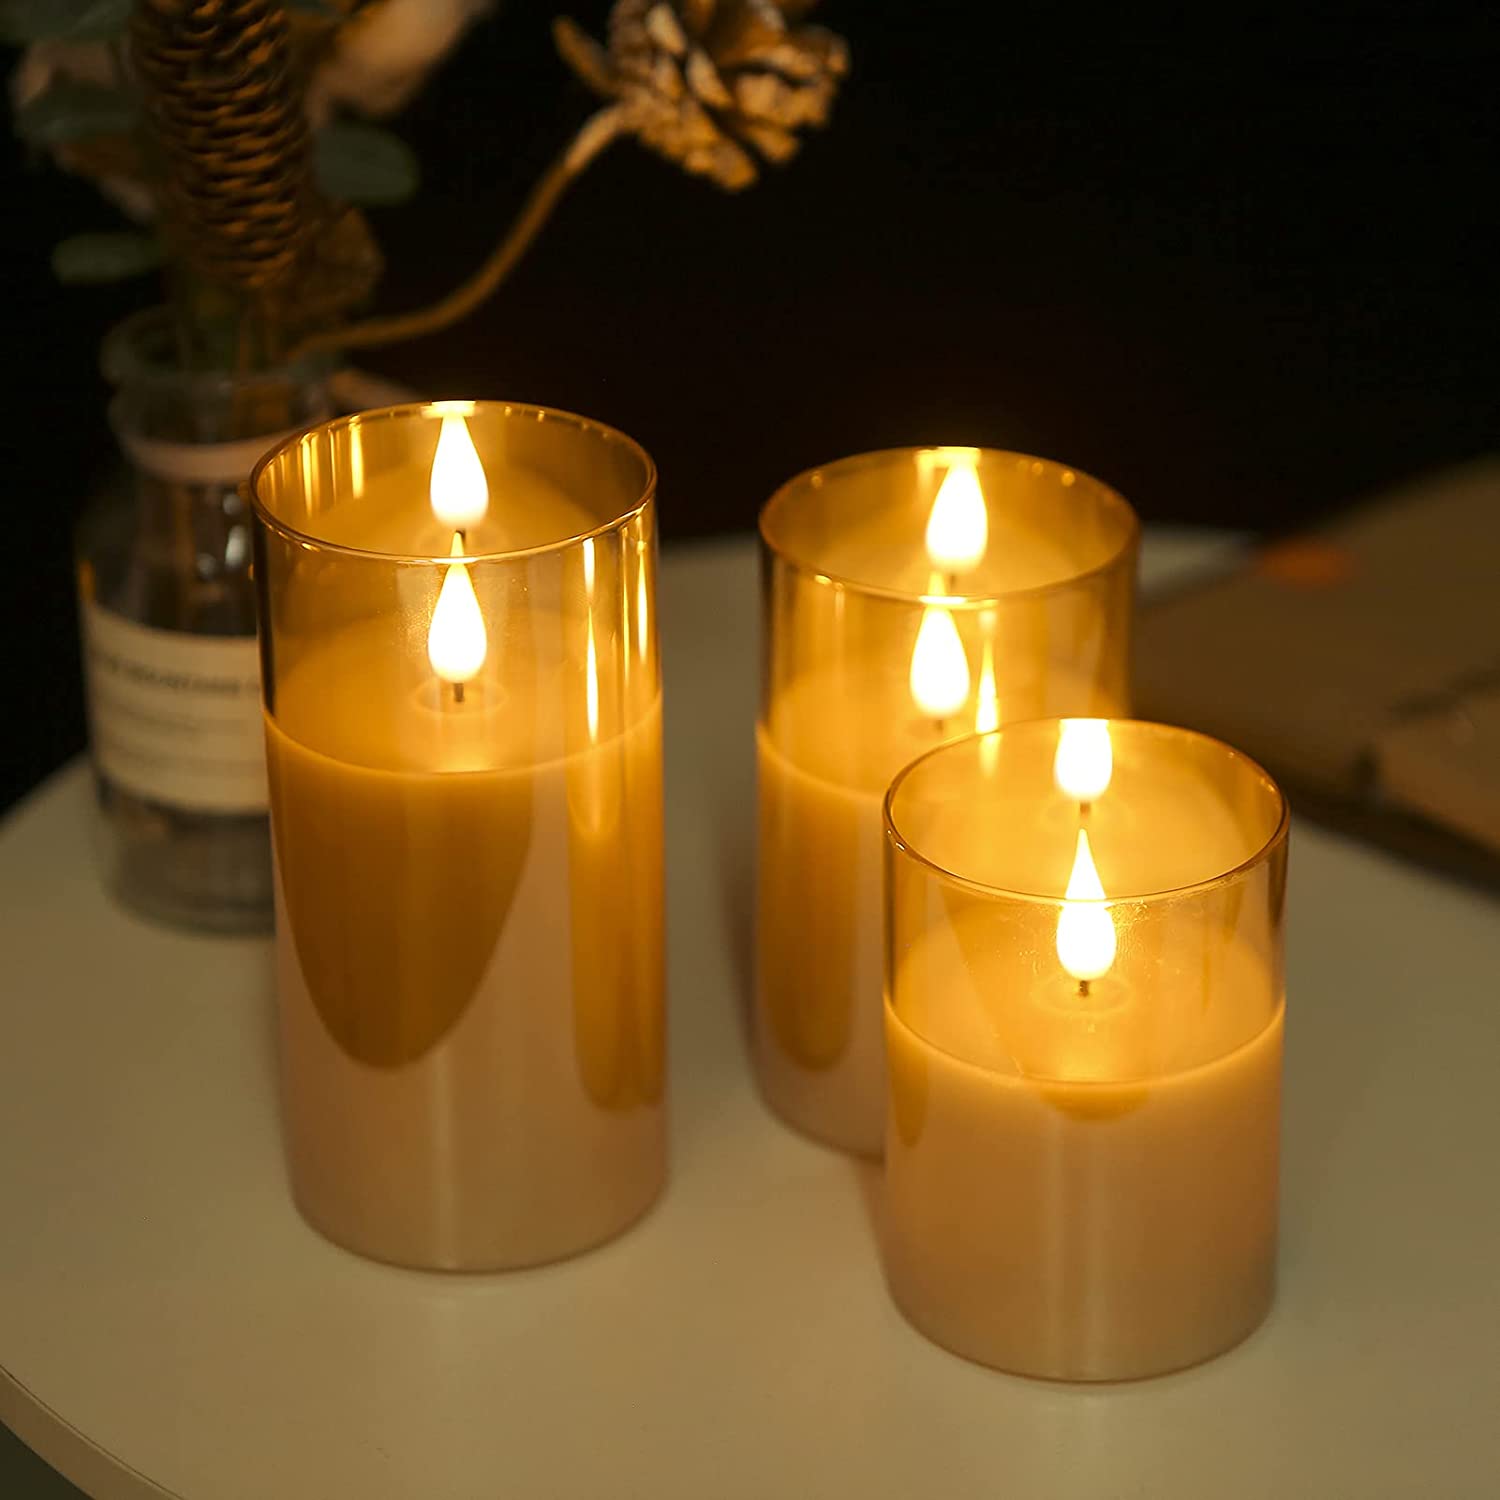  Glass Battery Operated LED Flameless Candles with Remote and  Timer, Real Wax Candles Warm Color Flickering Light for Festival Wedding  Home Party Decor(Pack of 3)-Gold : Tools & Home Improvement